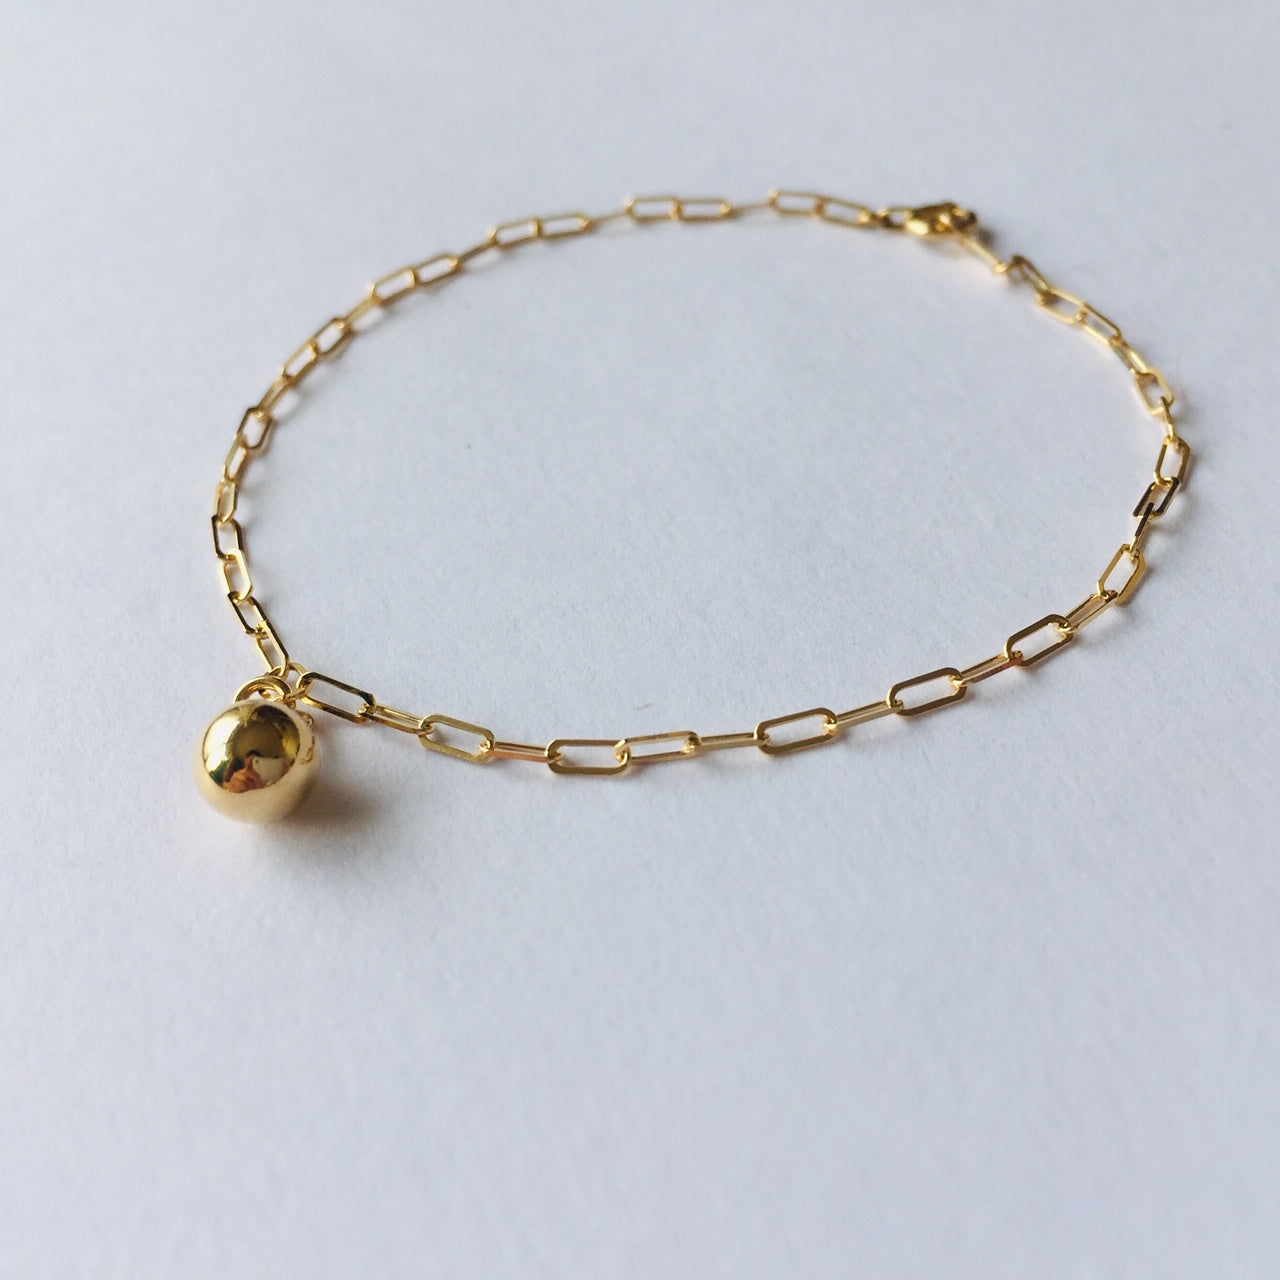 18K Gold Box Chain Bracelet with Gold Ball / Sphere Charm For Women ゴールドボール・チャーム・ブレスレット